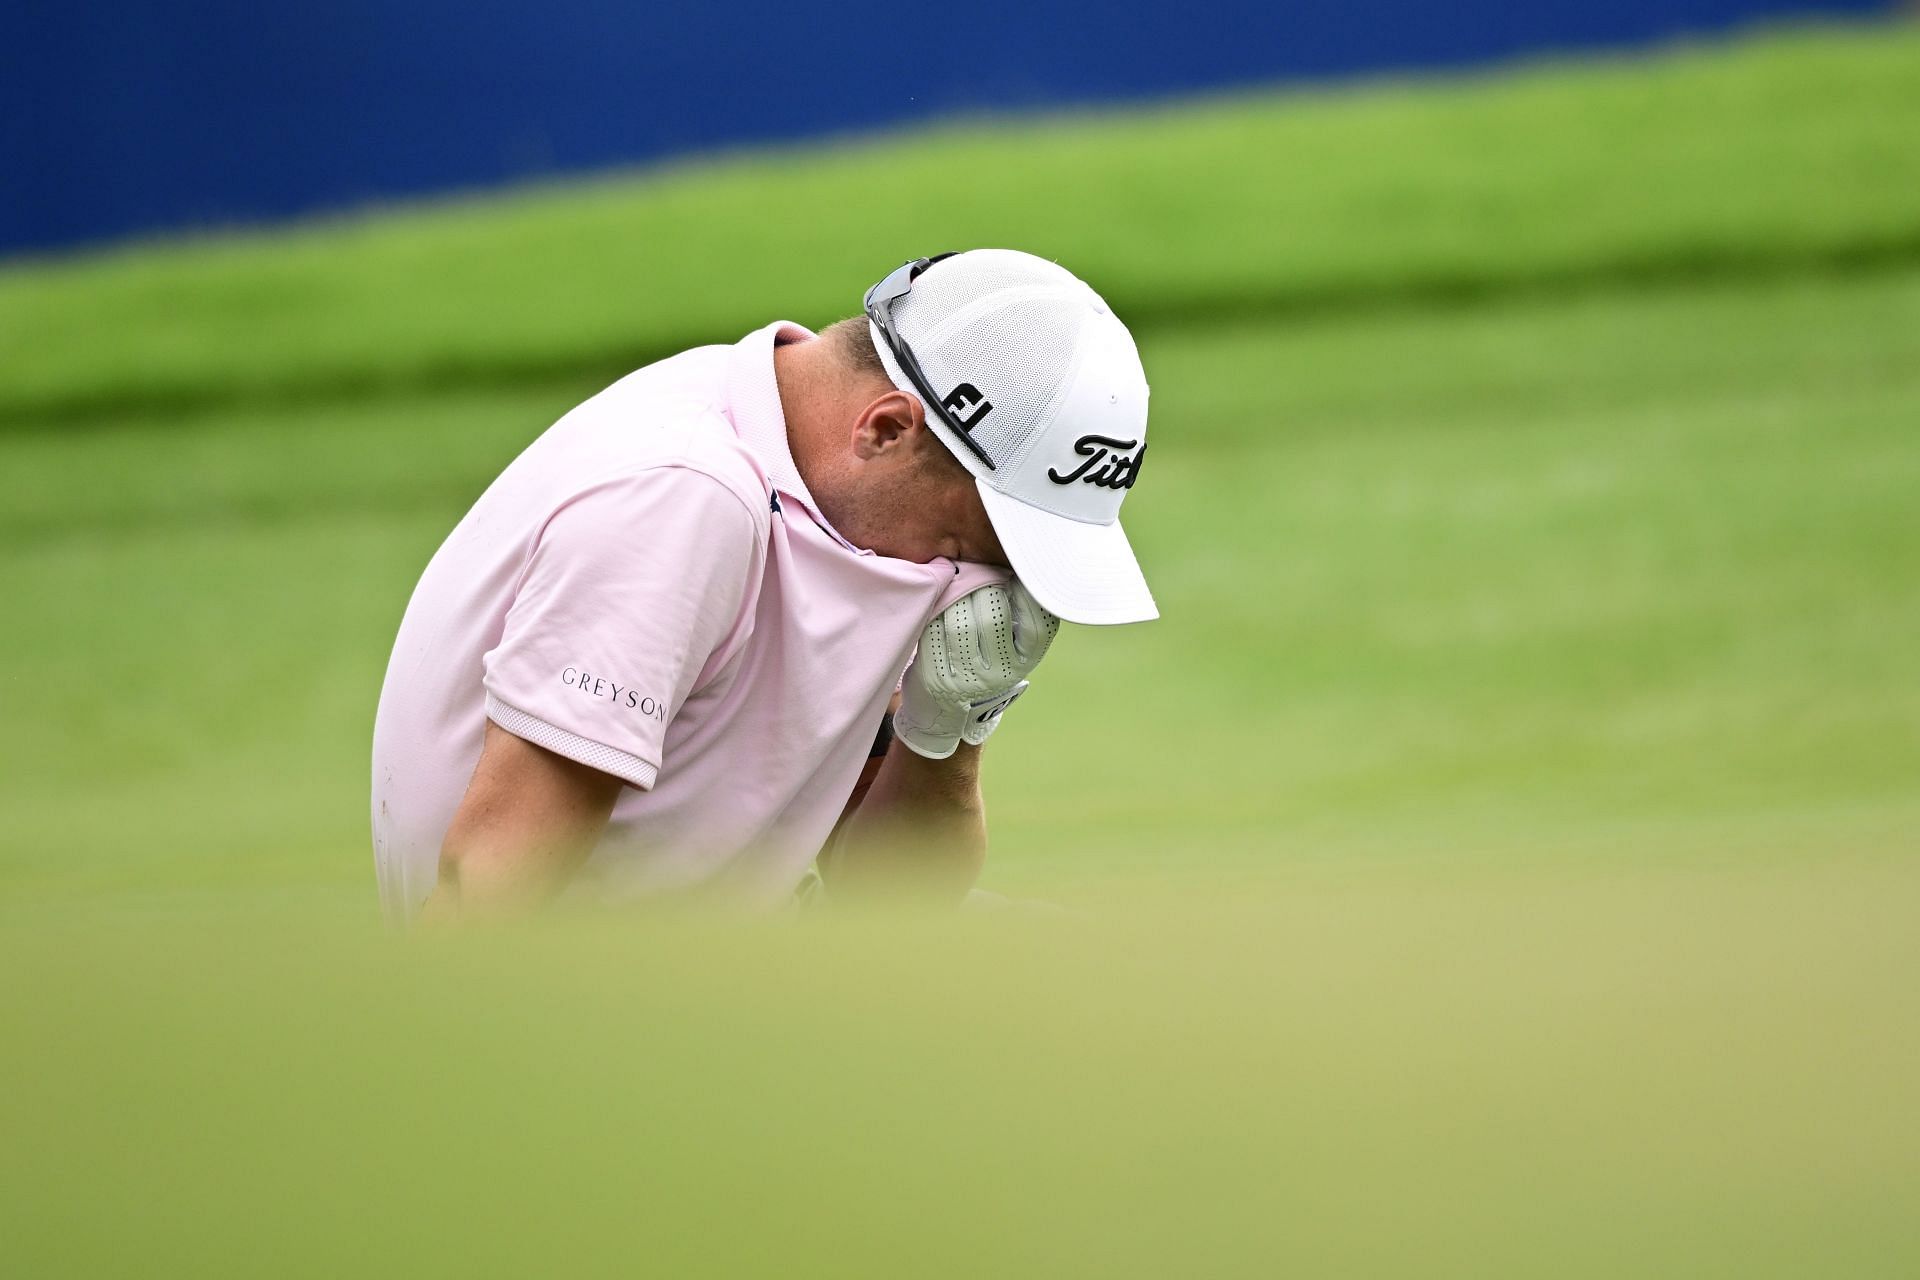 Justin Thomas reacts after a shot on the 18th green during the final round of the Wyndham Championship